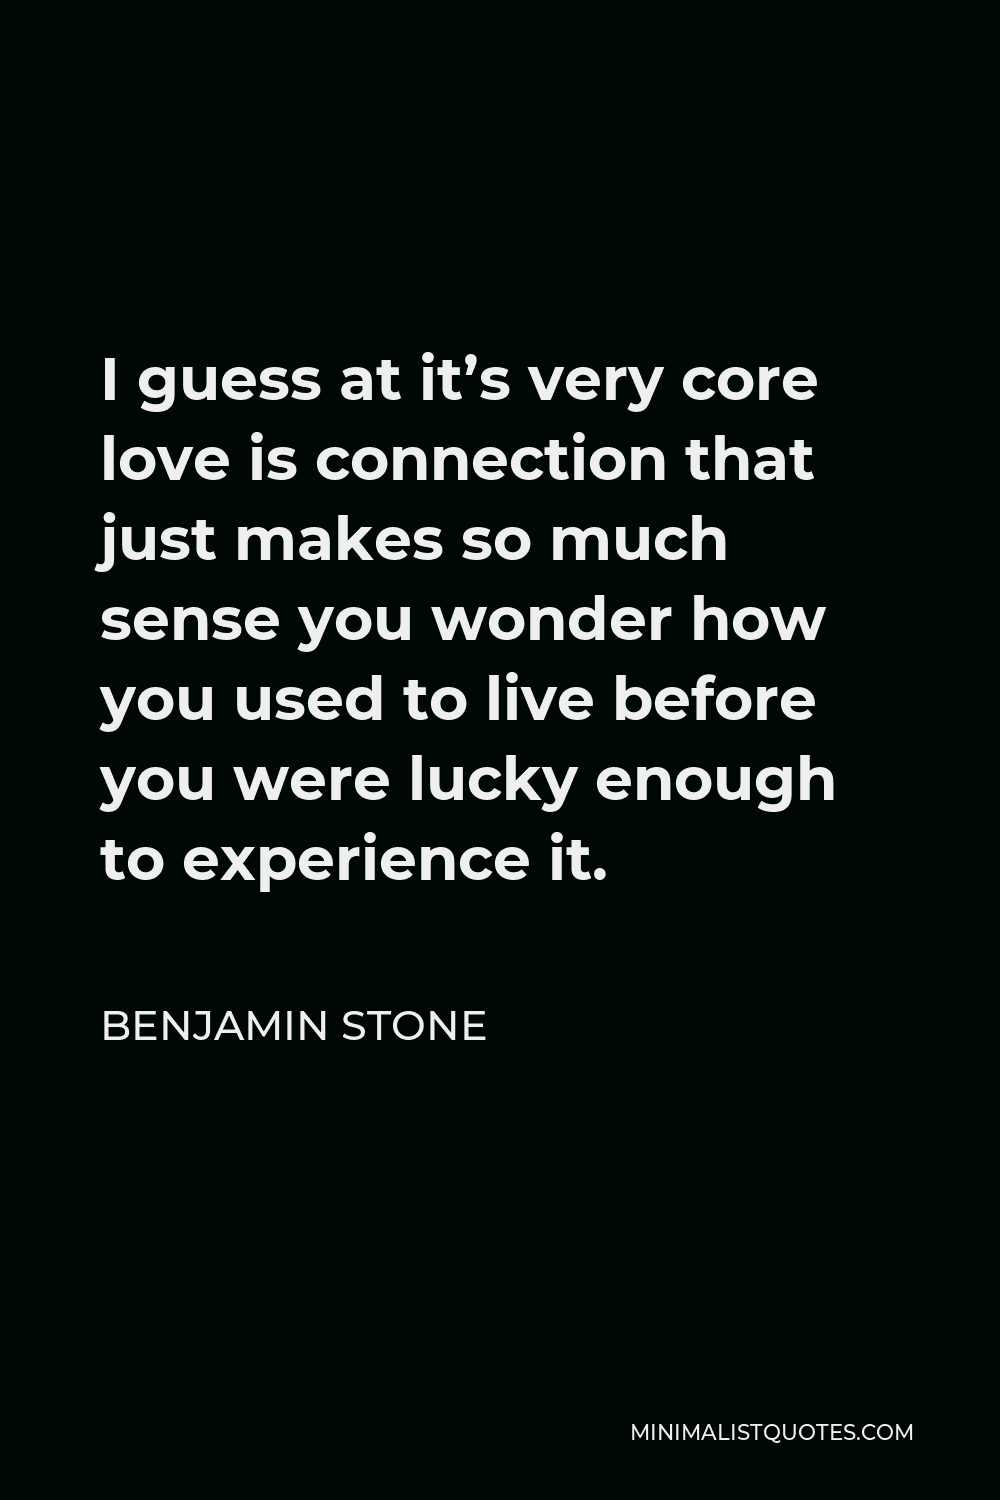 Benjamin Stone Quote - I guess at it’s very core love is connection that just makes so much sense you wonder how you used to live before you were lucky enough to experience it.